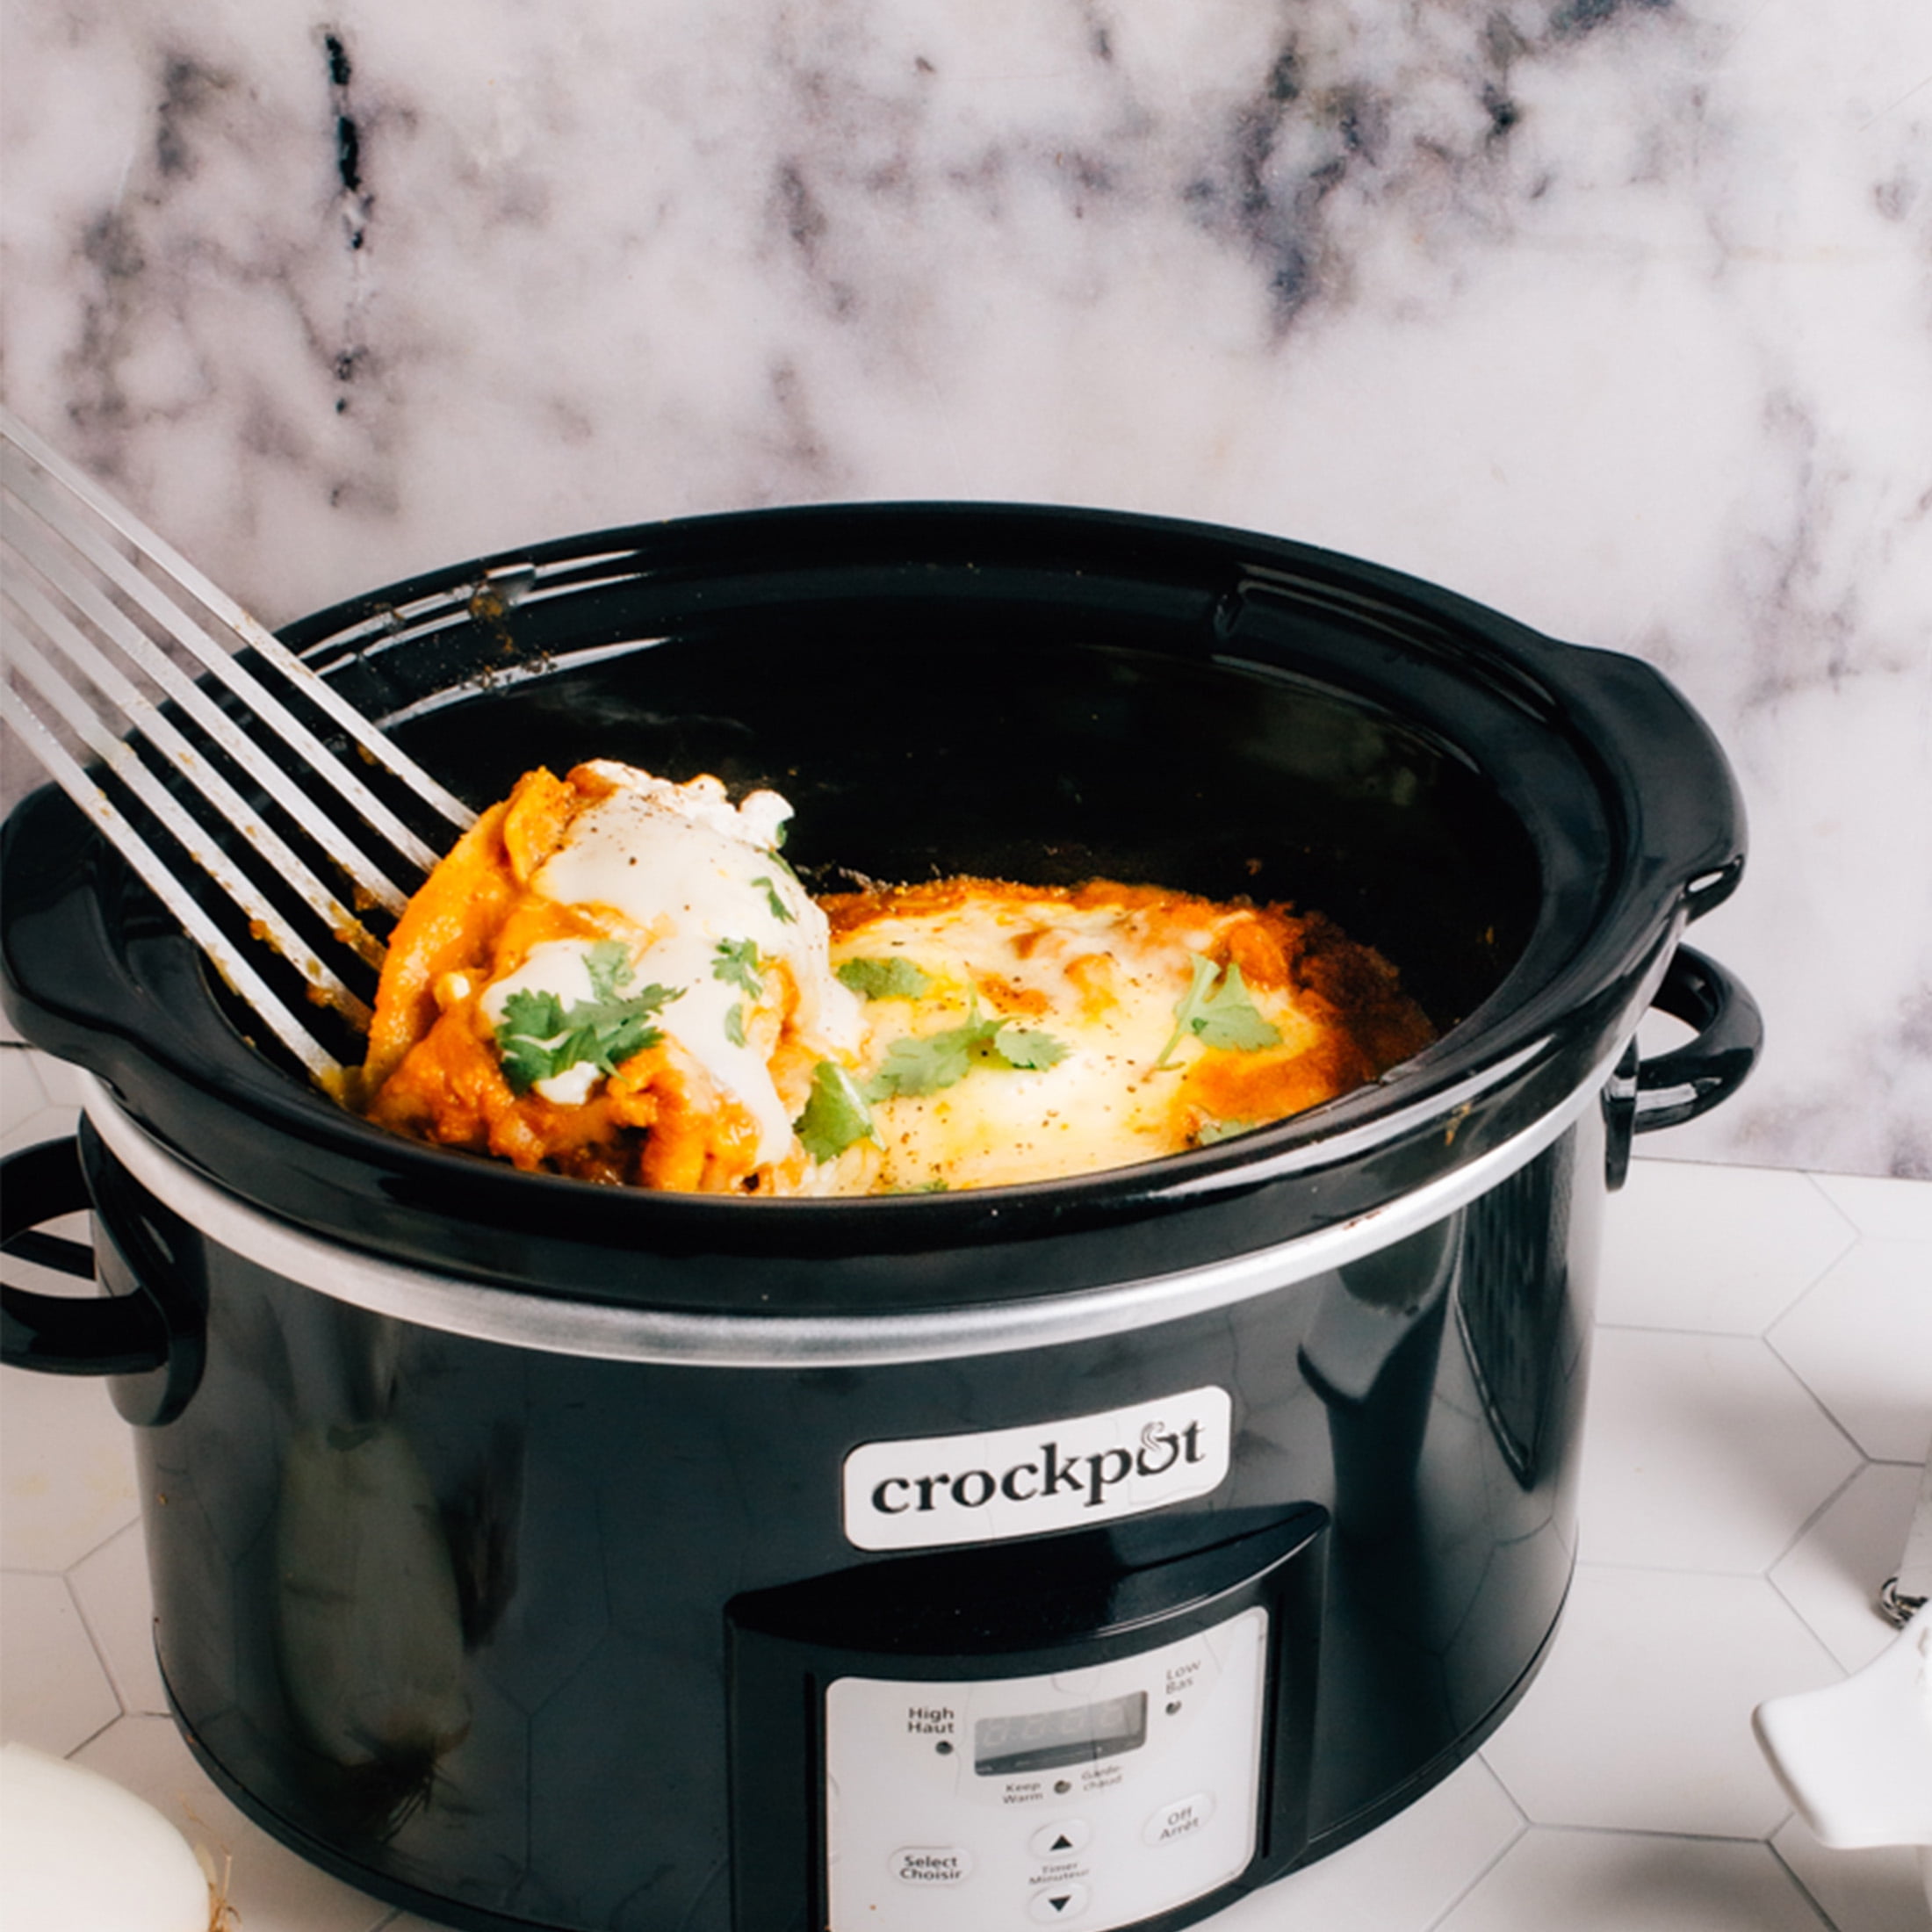  Crock-Pot Portable 4 Quart Stainless Steel Large Slow Cooker  for Small Kitchen with Locking Lid, Handles, and Digital Automatic Timer,  Black: Home & Kitchen